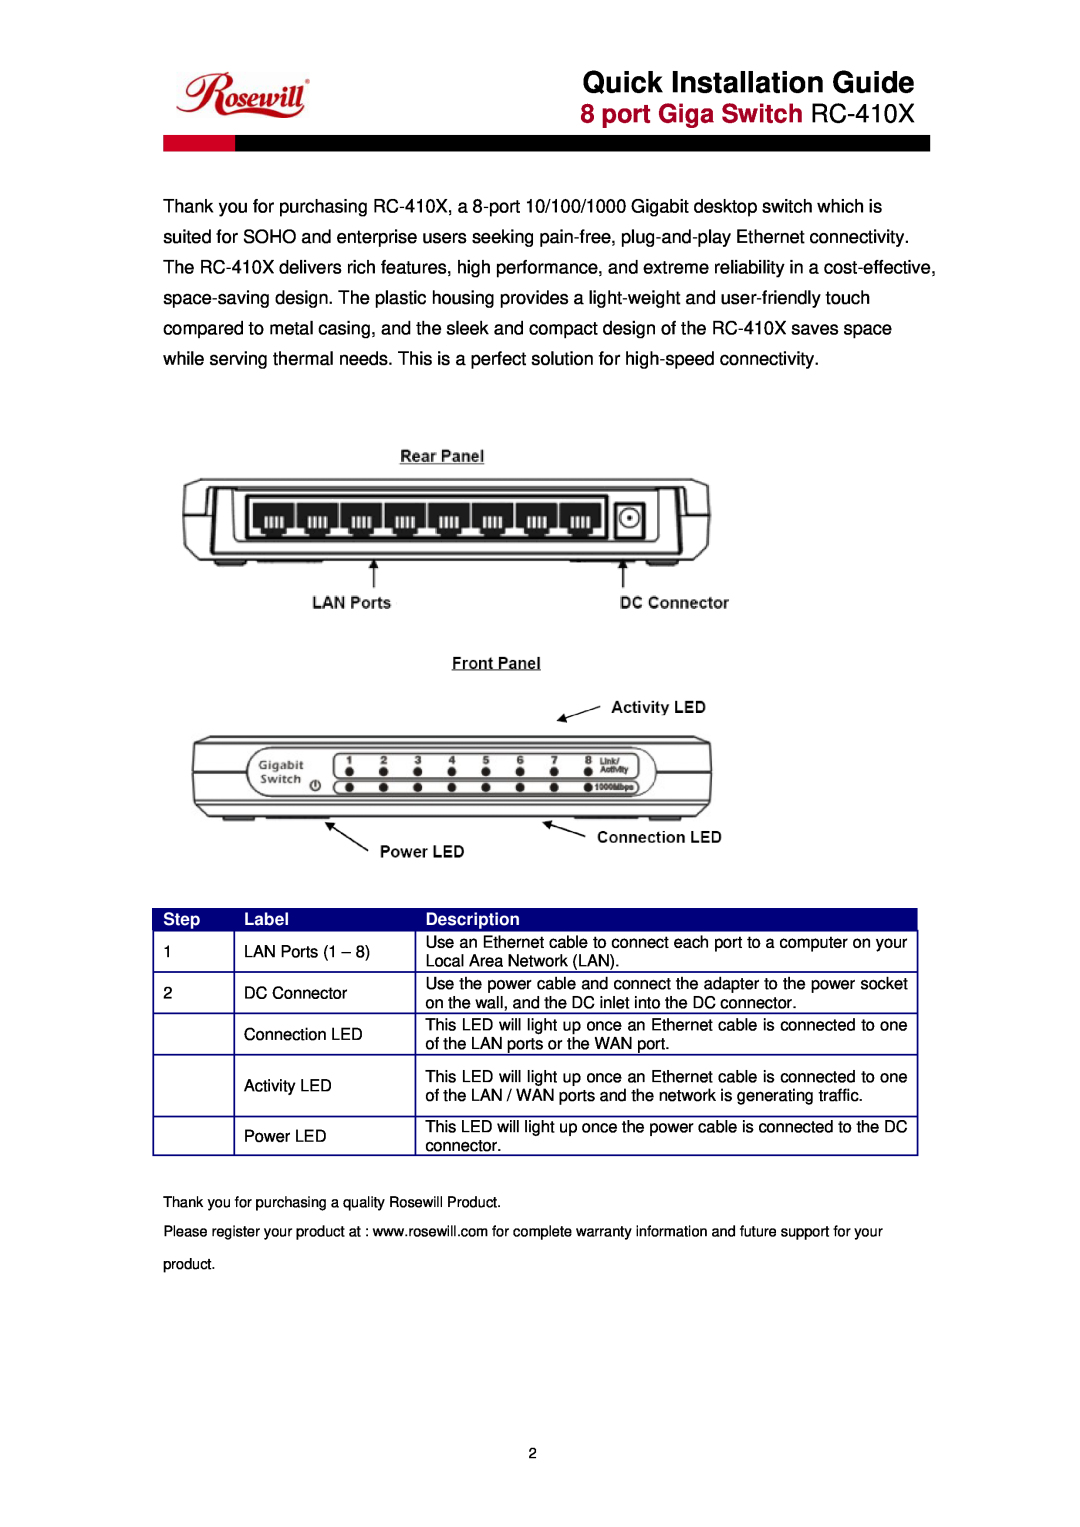 Rosewill manual Quick Installation Guide, port Giga Switch RC-410X, Step, Label, Description 